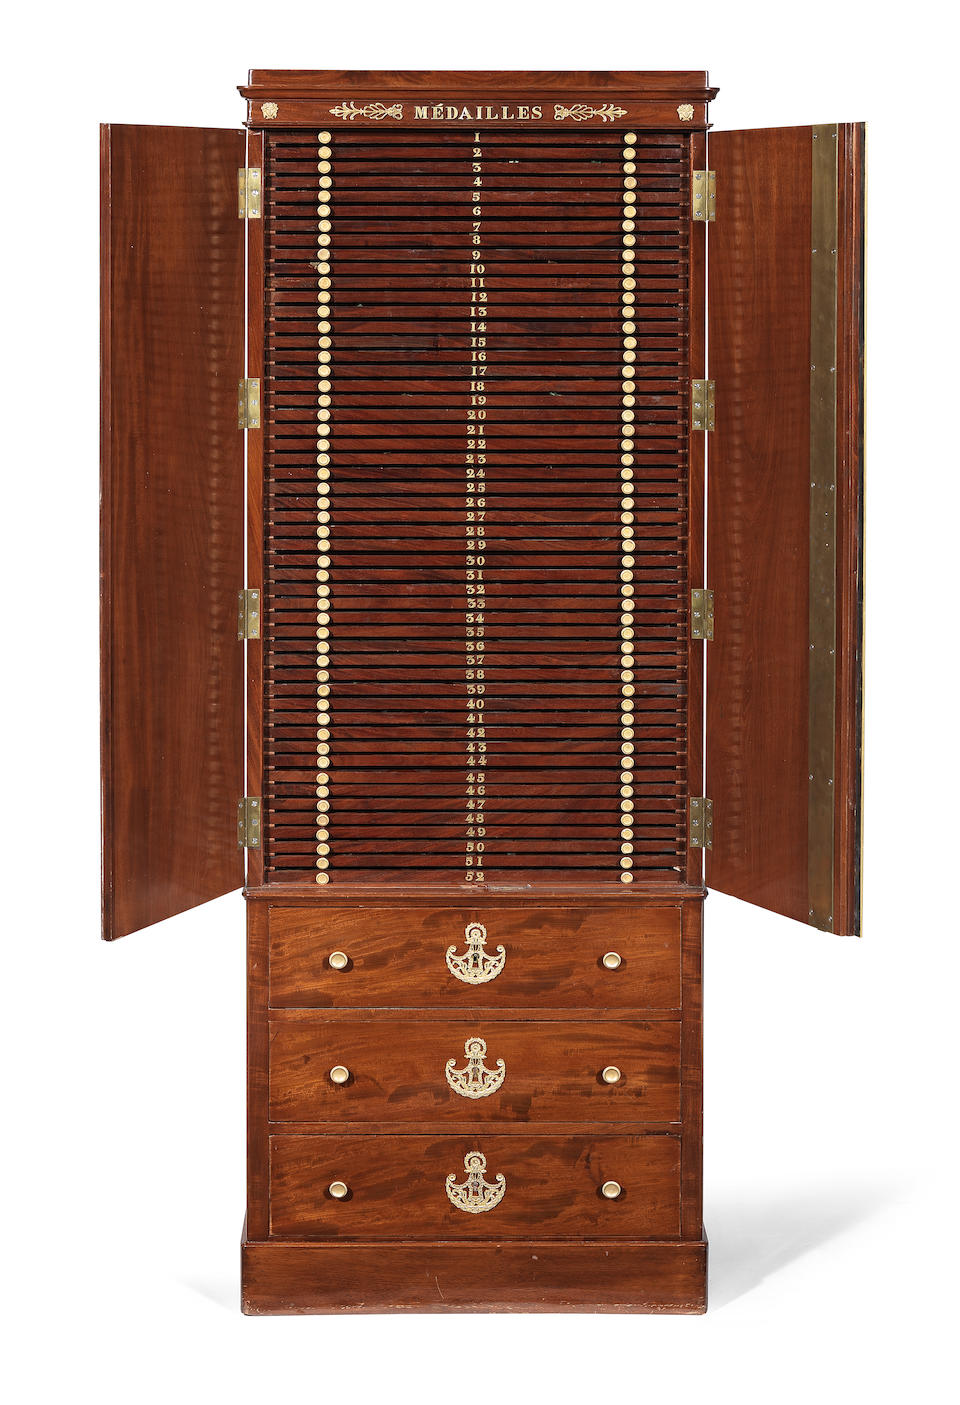 A Fine Empire mahogany and gilt bronze mounted coin or medal cabinet In the manner of Fran&#231;ois-Honor&#233;-Georges Jacob-Desmalter (1770&#8211;1841)